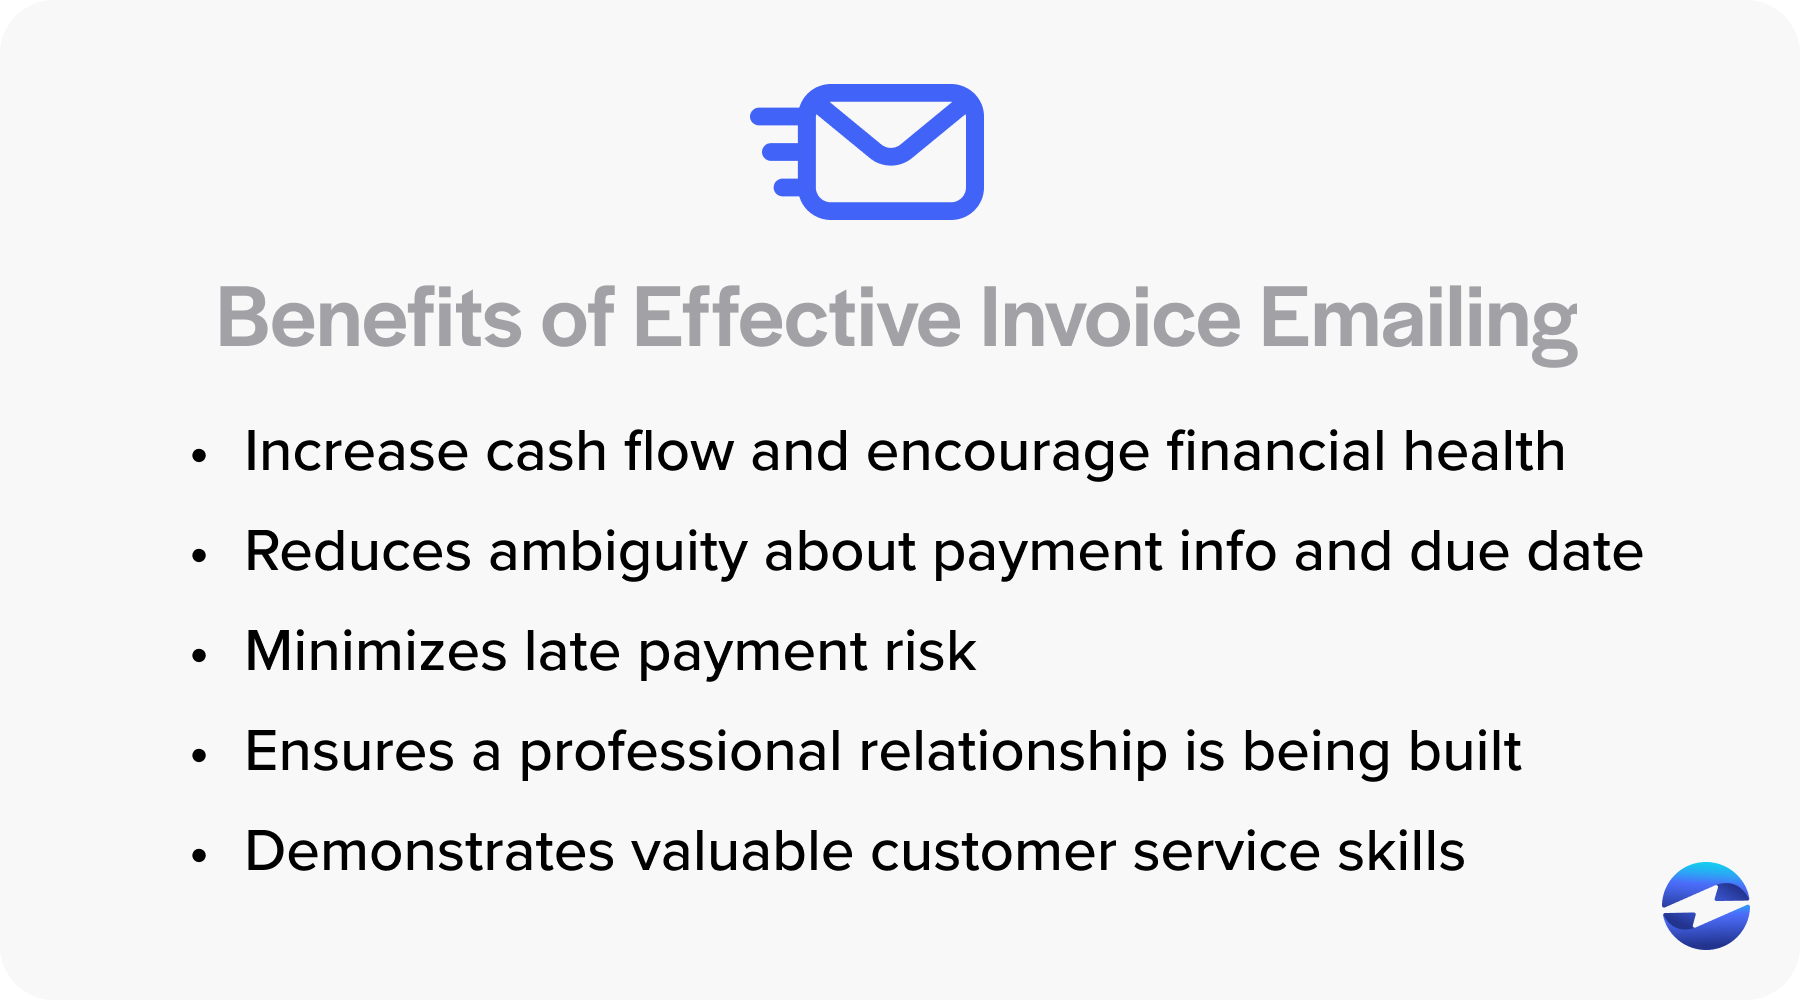 Benefits of Email